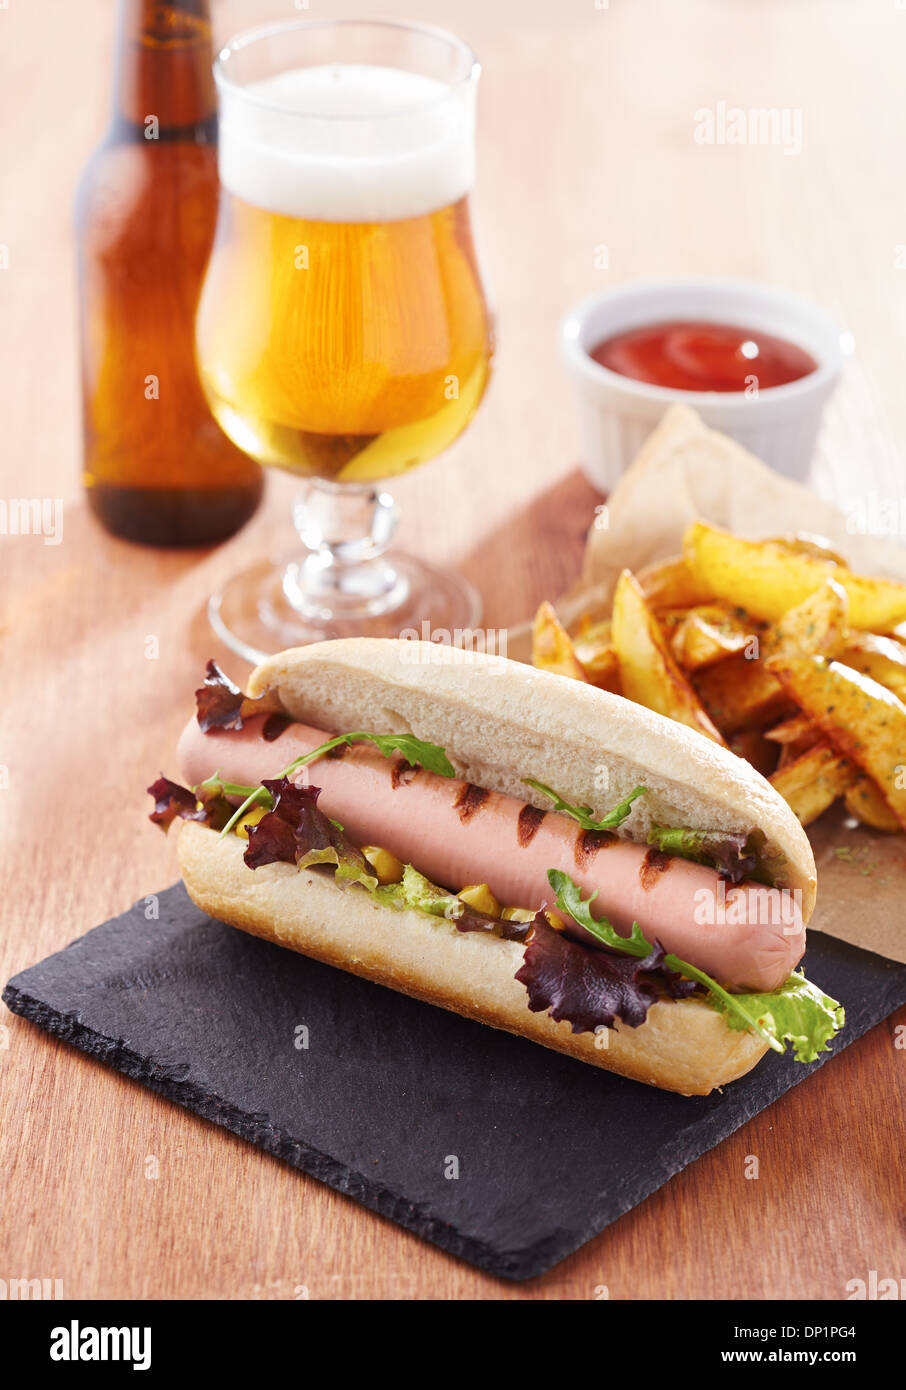 Gourmet hot dog on slate board with rustic fries Stock Photo